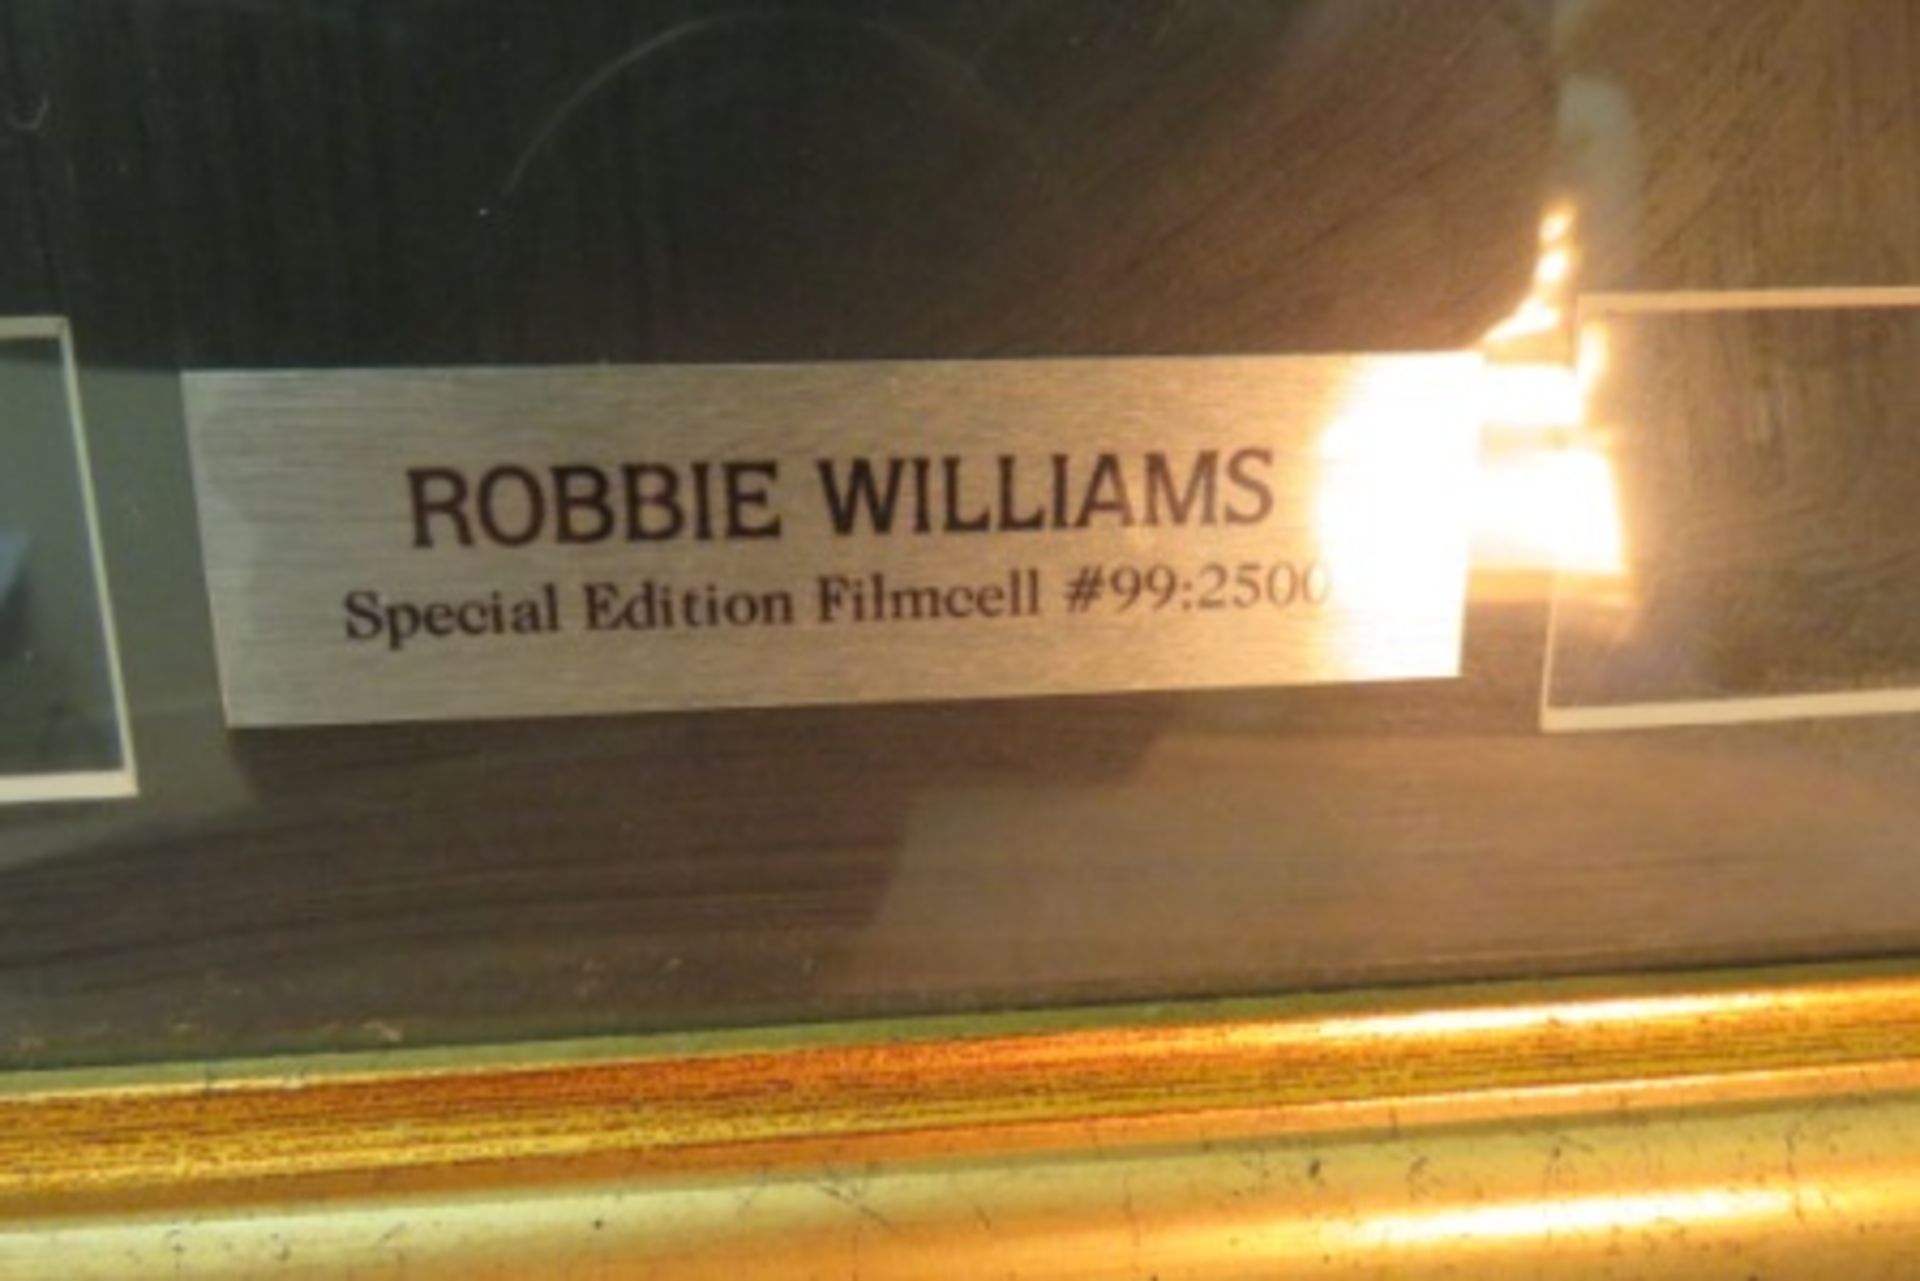 Limited Edition Robbie Williams Double Filmcell - Framed & Glazed - #99 Of 2500 - Image 2 of 3